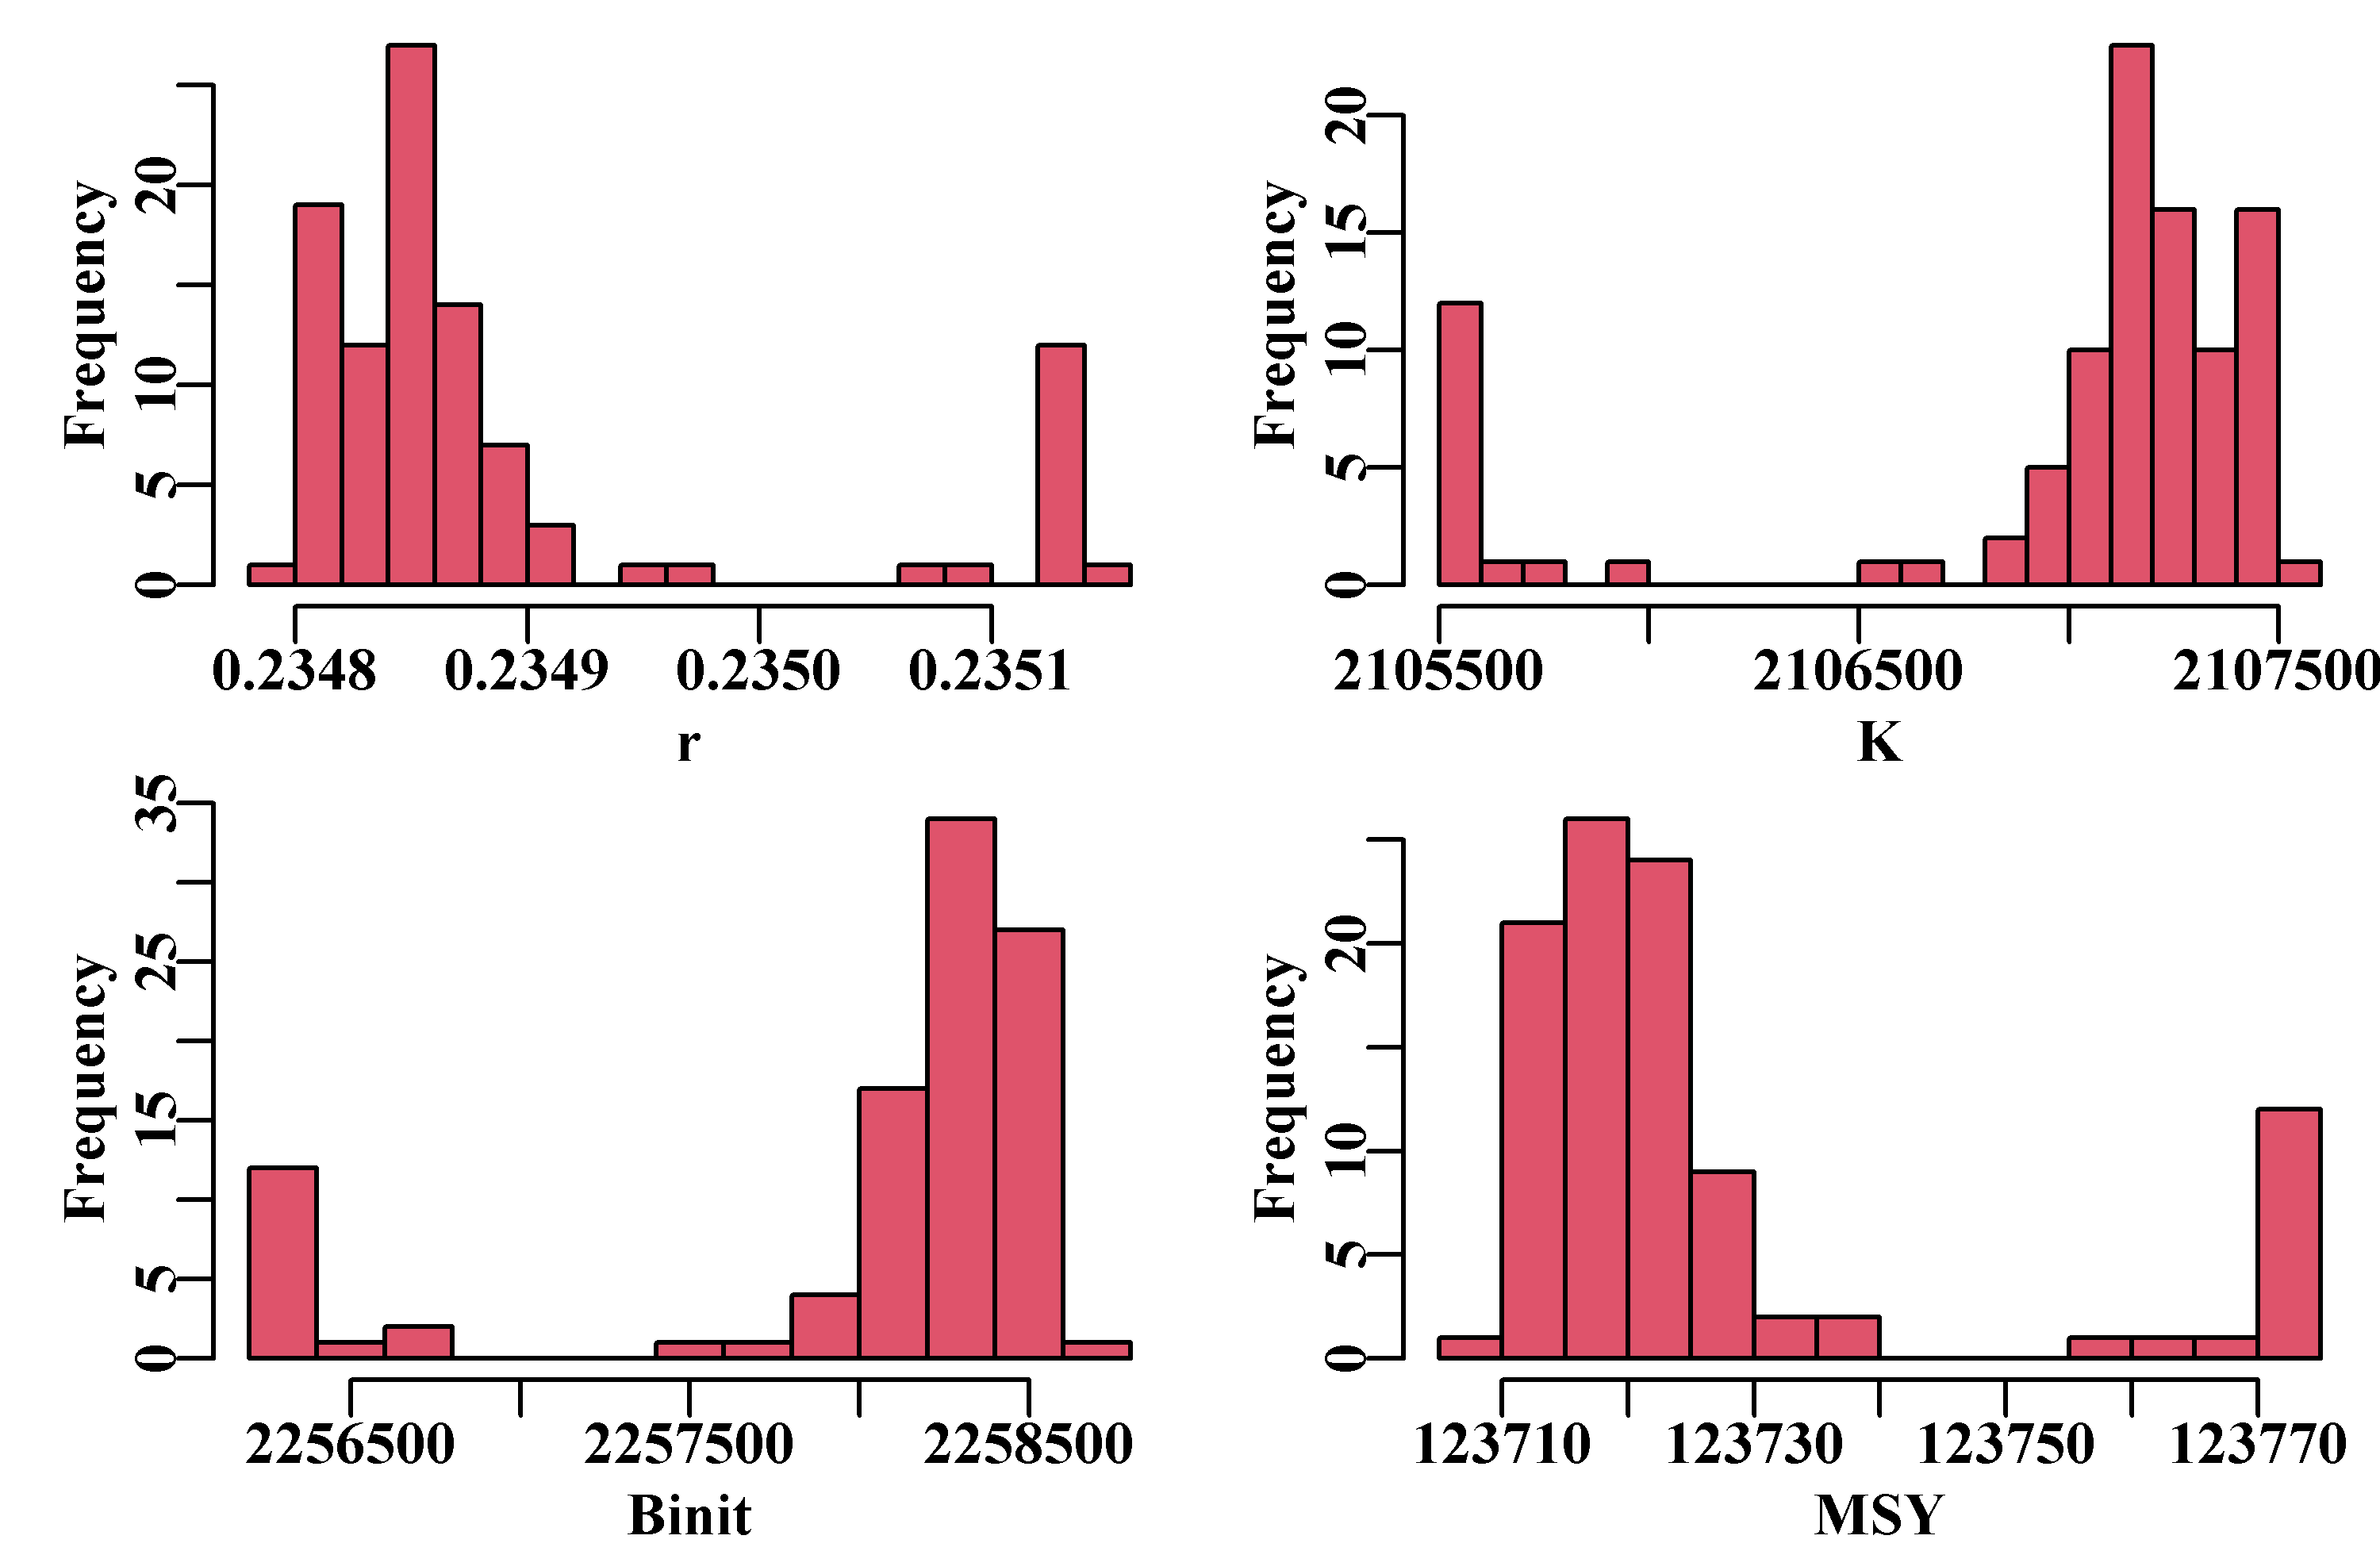 Histograms of the main parameters and MSY from the 100 trials in a robustness test of the model fit to the schaef data-set. The parameter estimates are all close, but still there is variation, which is a reflection of estimation uncertainty. To improve on this, one might try a smaller steptol, which defaults to 1e-06, but stable solutions might not always be possible. If you use steptol = 1e-07 the range of values across the variation becomes much tighter but some slight variation remains, as expected when using numerical methods. This is another reason why the particular values for the parameter estimates are most meaningful when we also have an estimate of variation or of uncertainty.